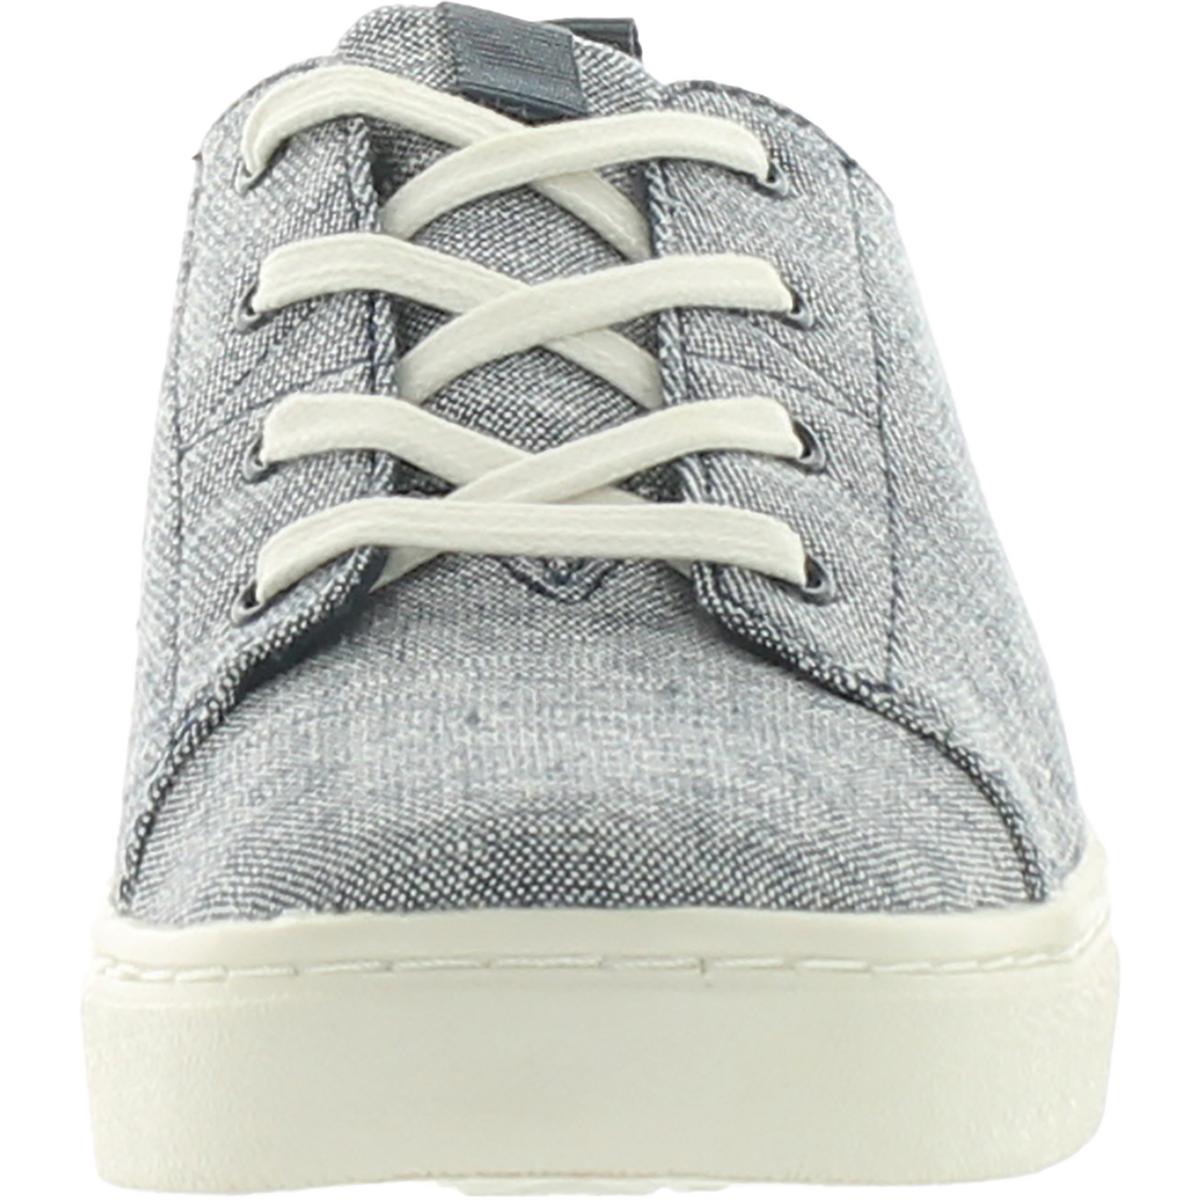 TOMS Lenny Boys Chambray Active Casual and Fashion Sneakers